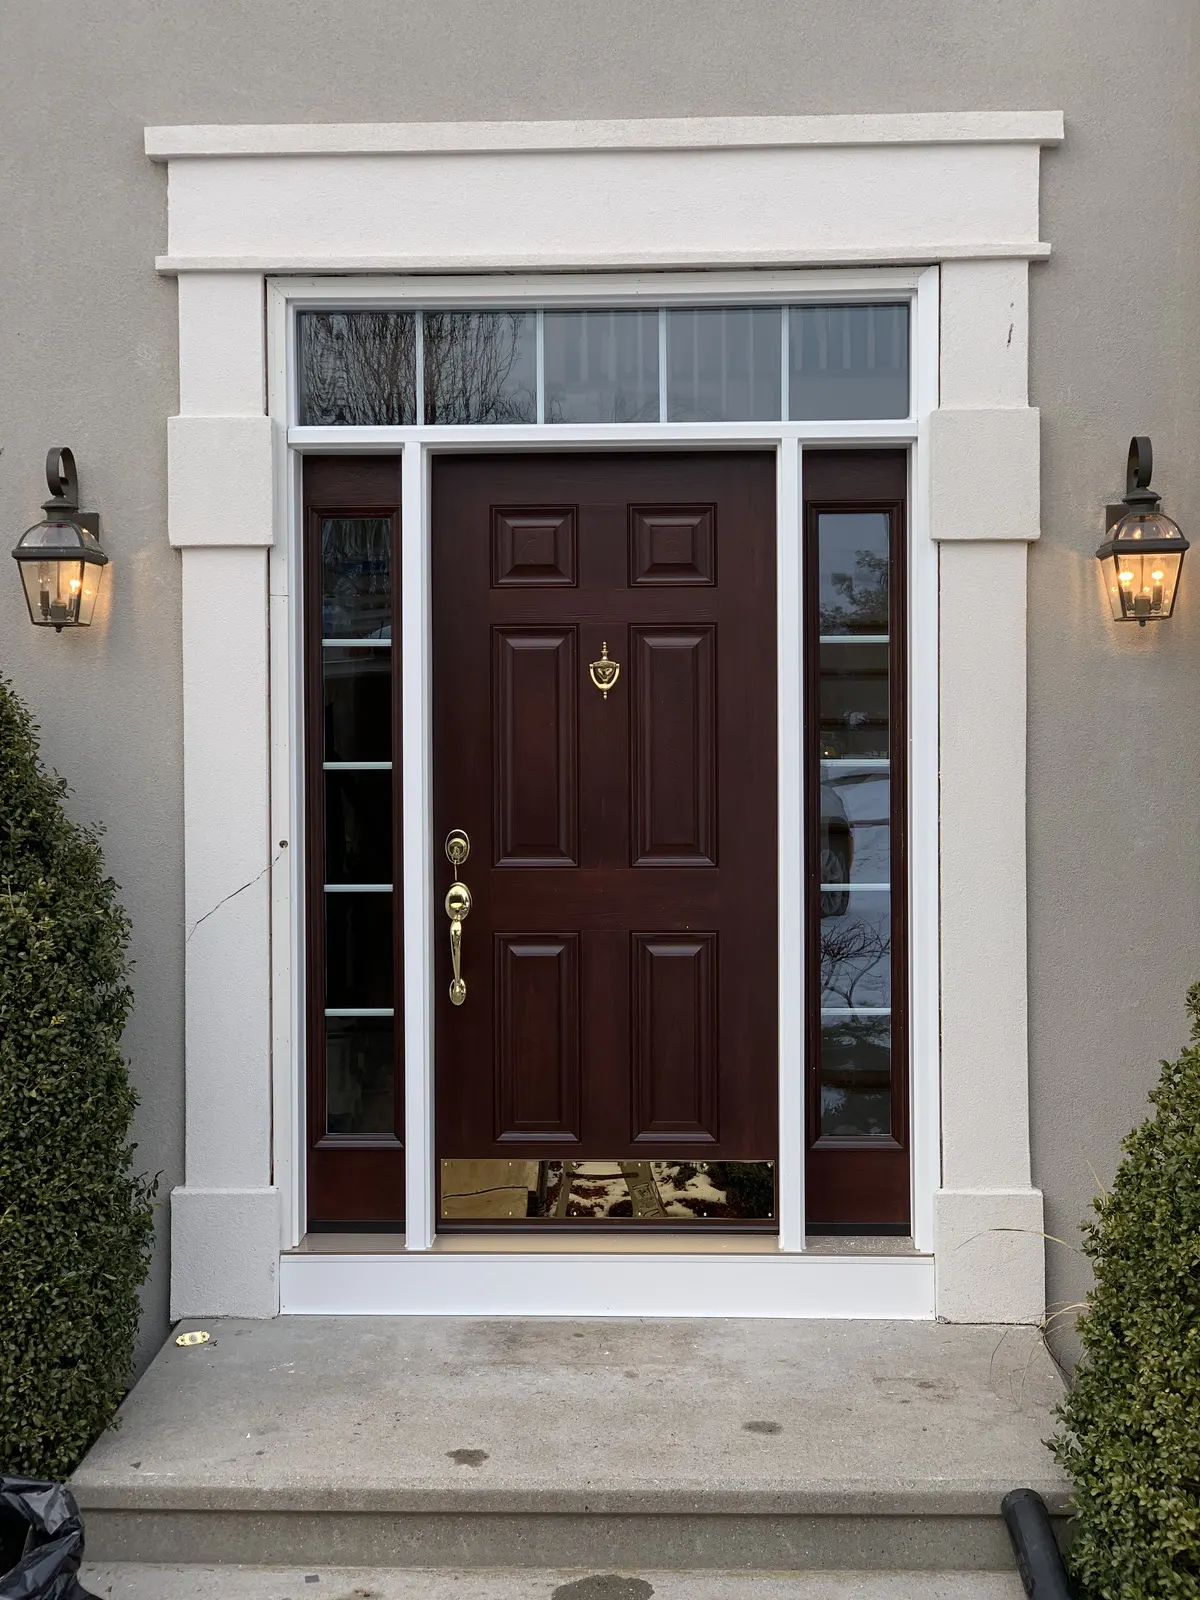 ProVia Front Entry Door with Sidelites in Mahogany Finish - SEVEN SUN CT